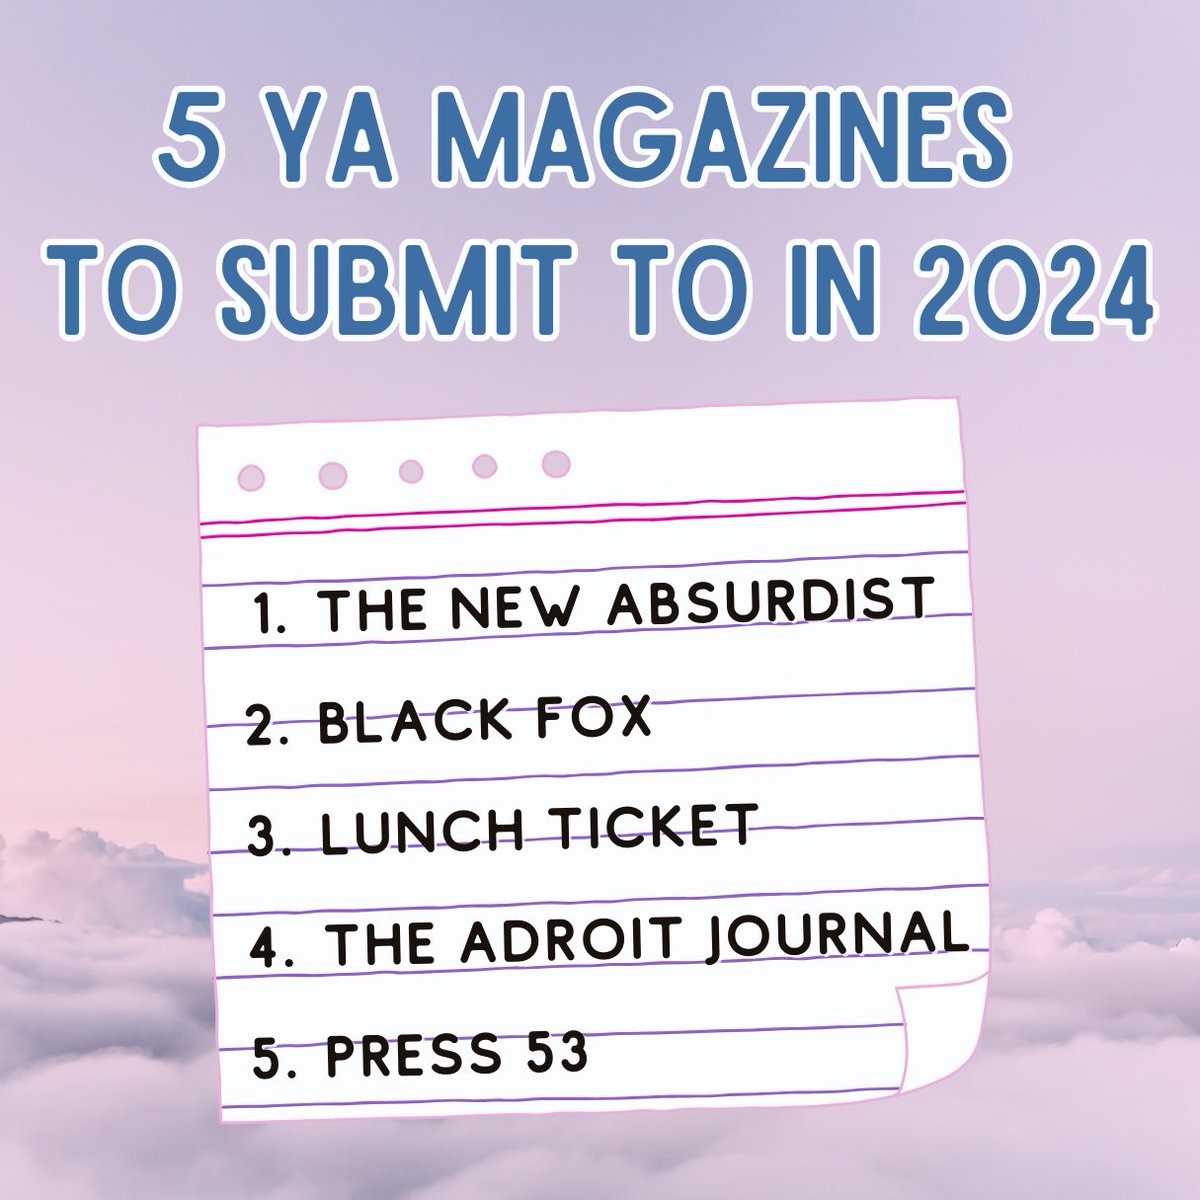 Looking for more YA literary magazines to submit to this year? We've got you covered! Check out these five magazines and see if they'd be a great fit for your work!